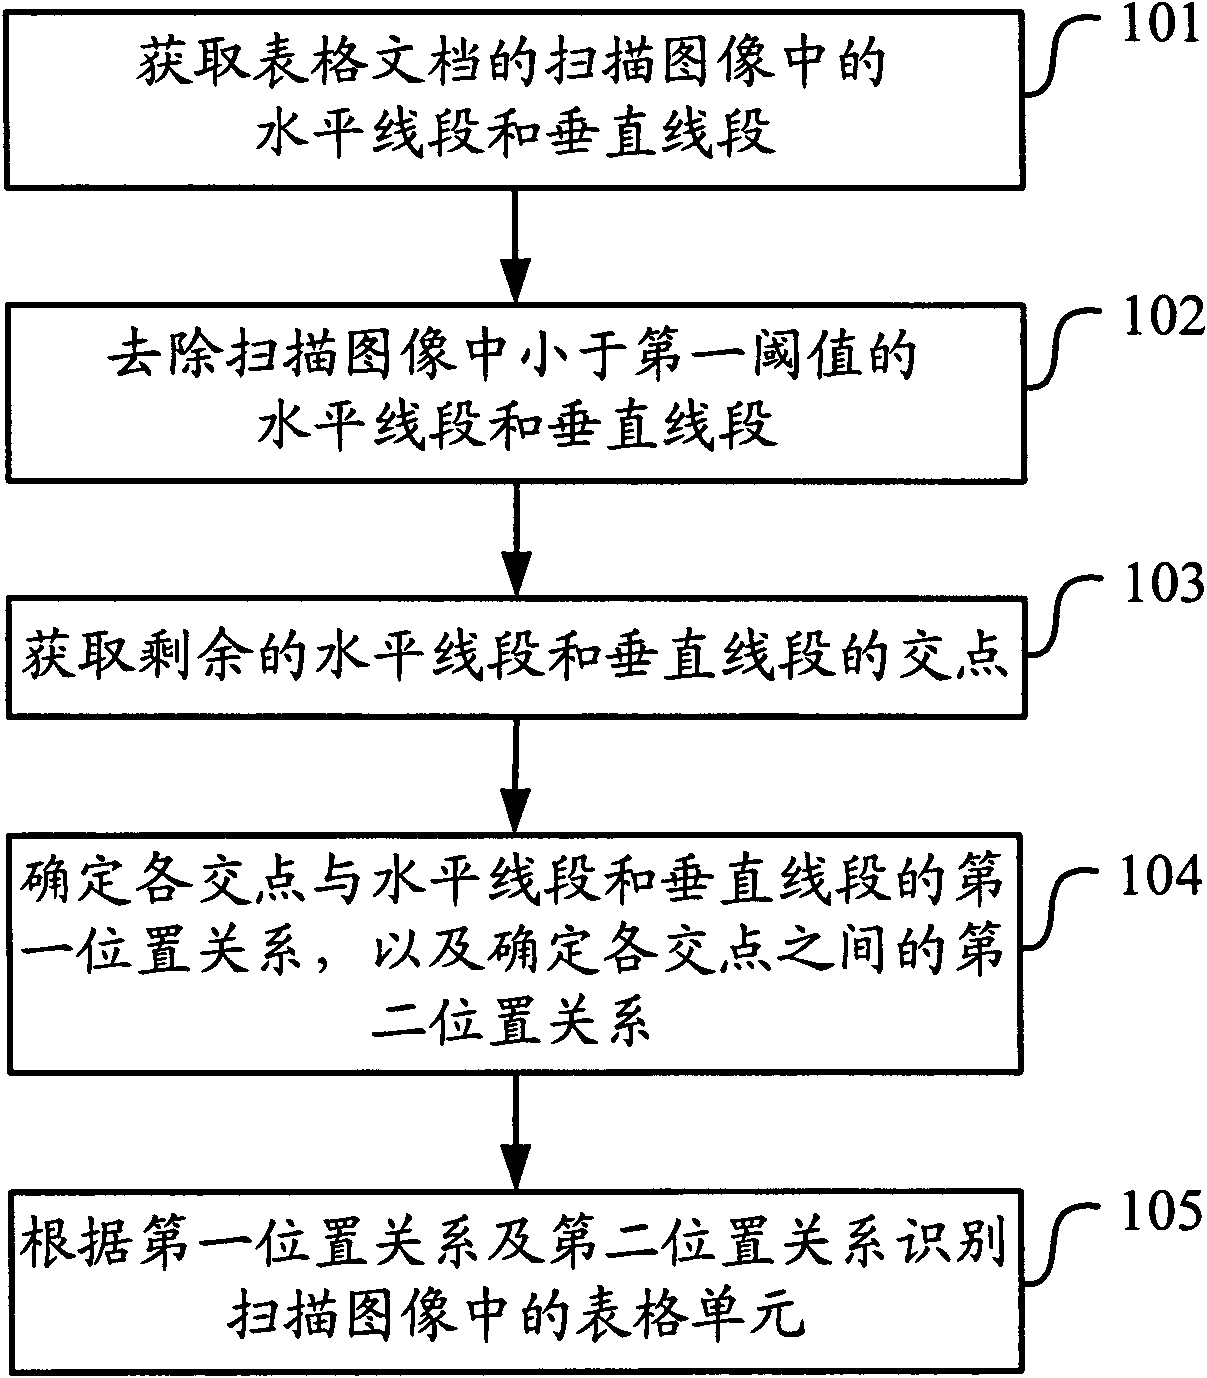 Method and device for recognizing table cells in scanned image